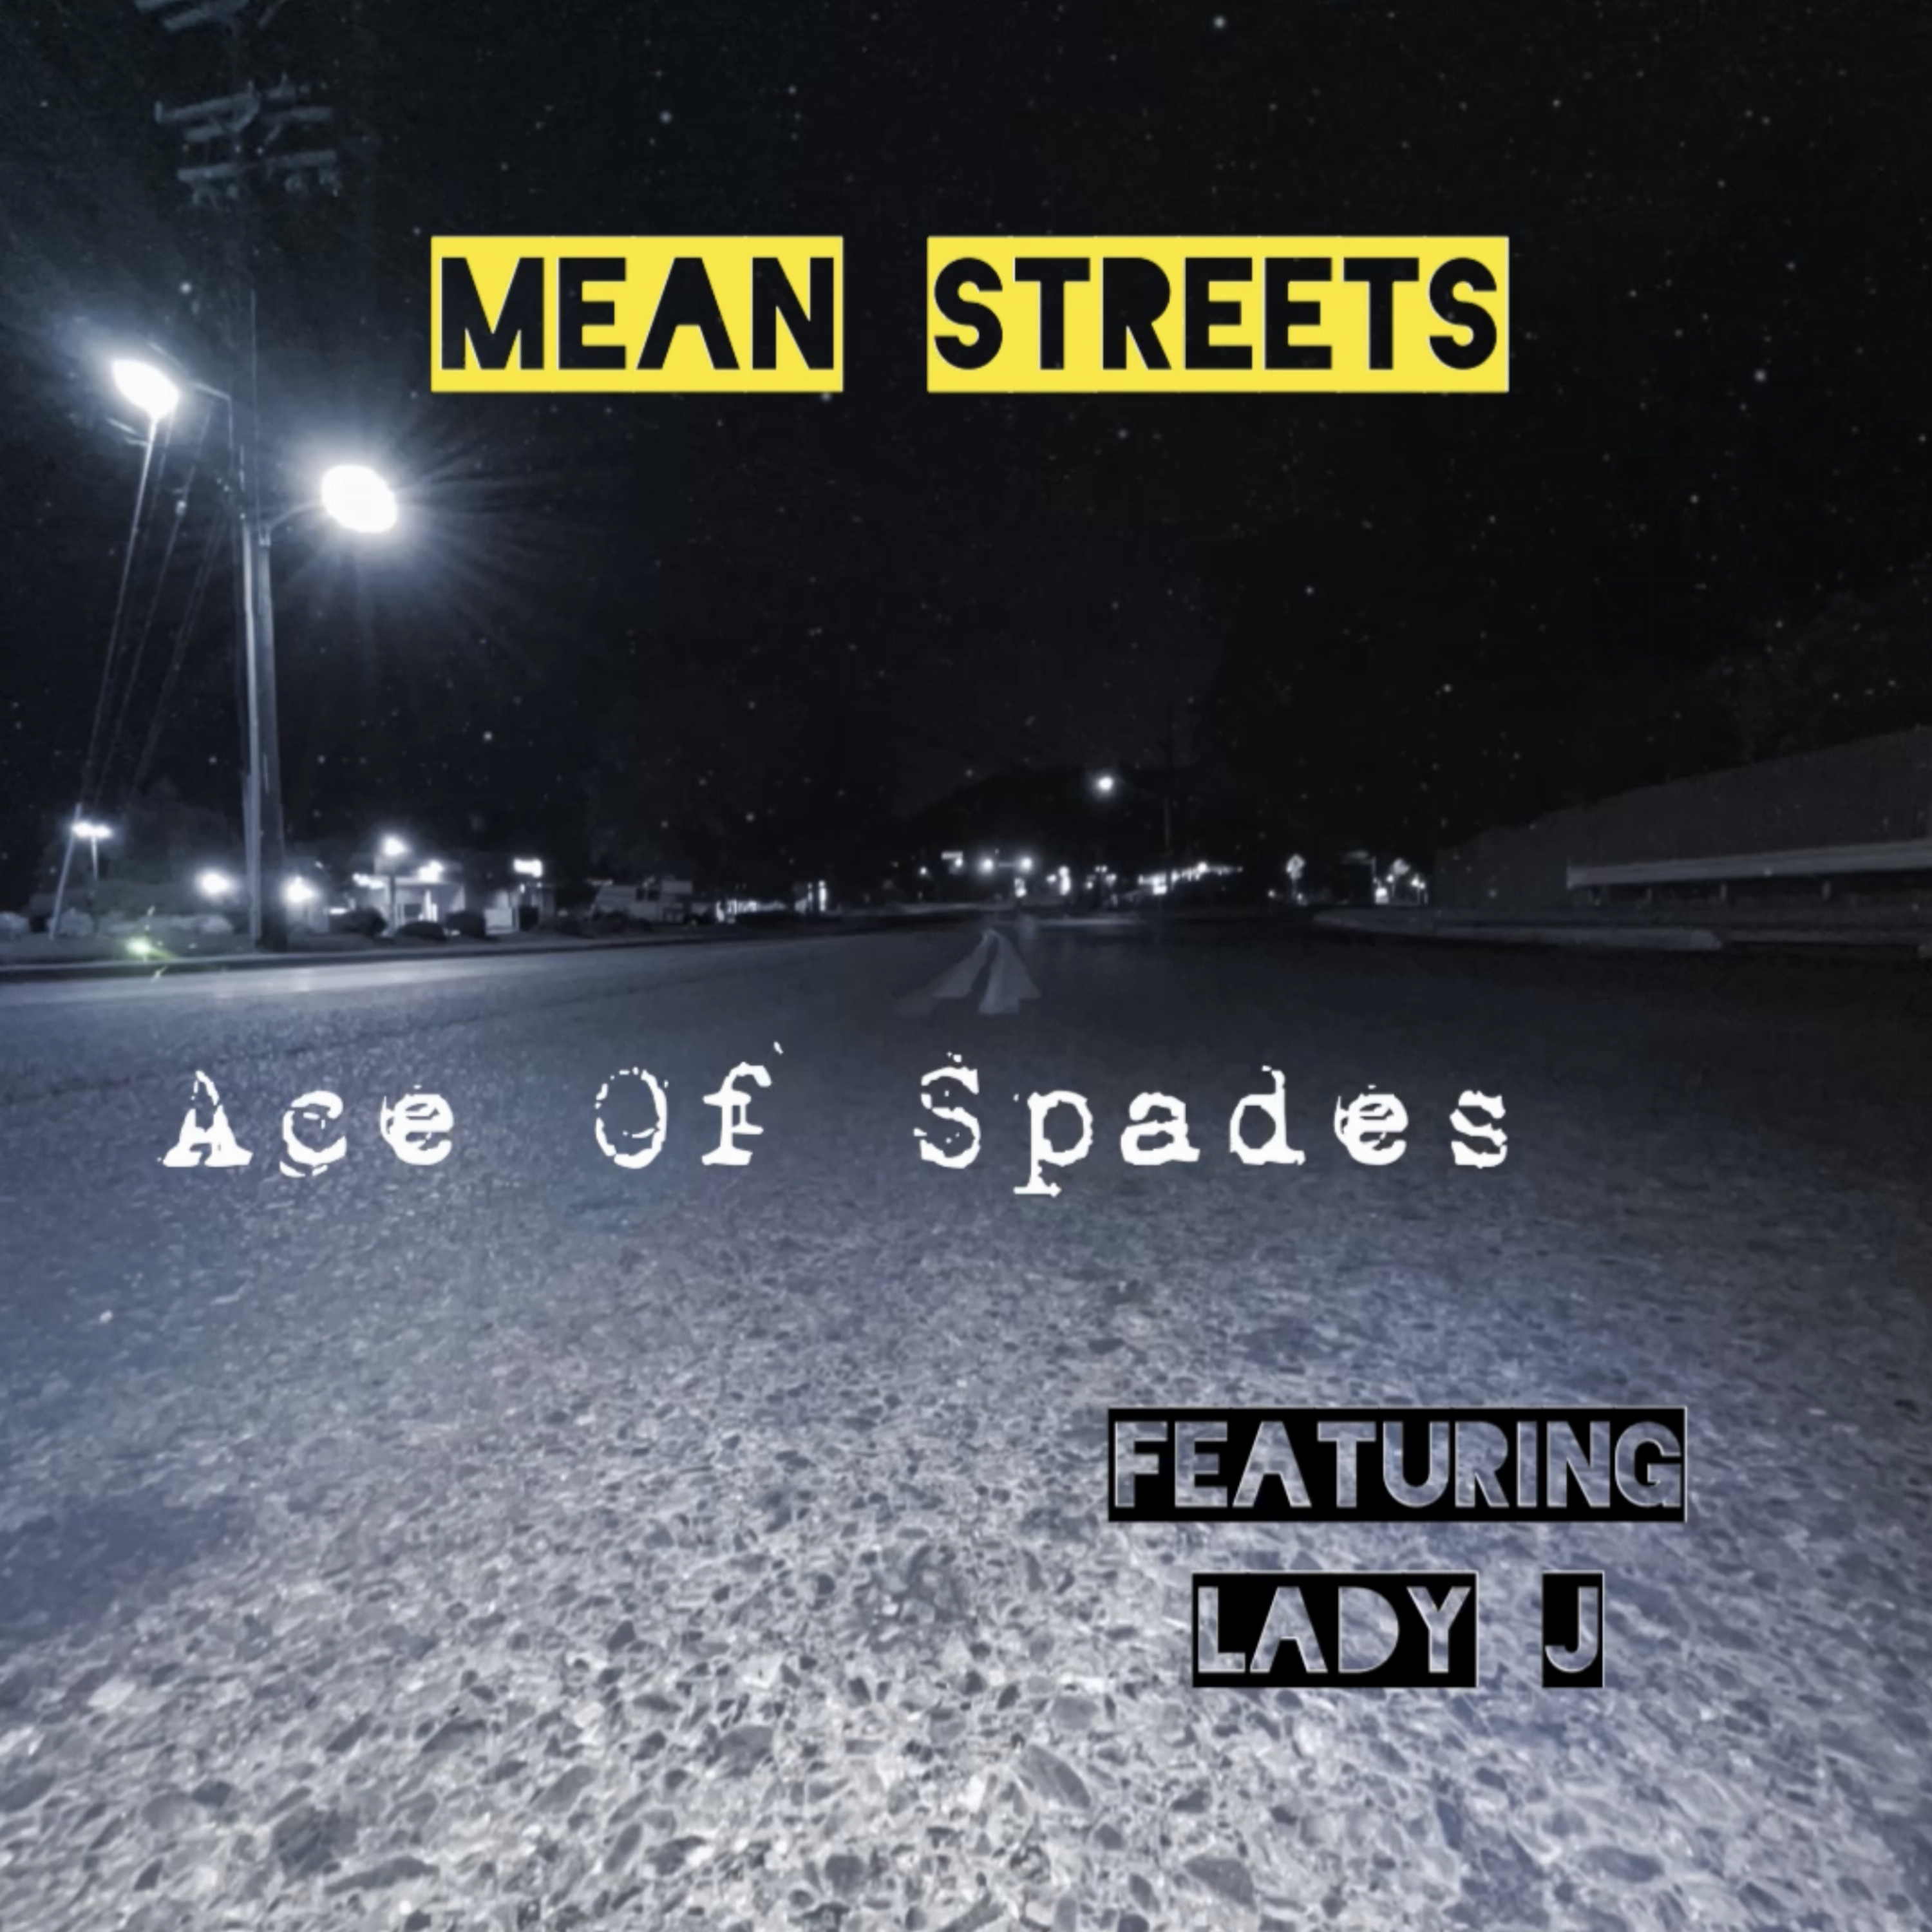 Art for Mean Streets by Ace Of Spades featuring Lady J